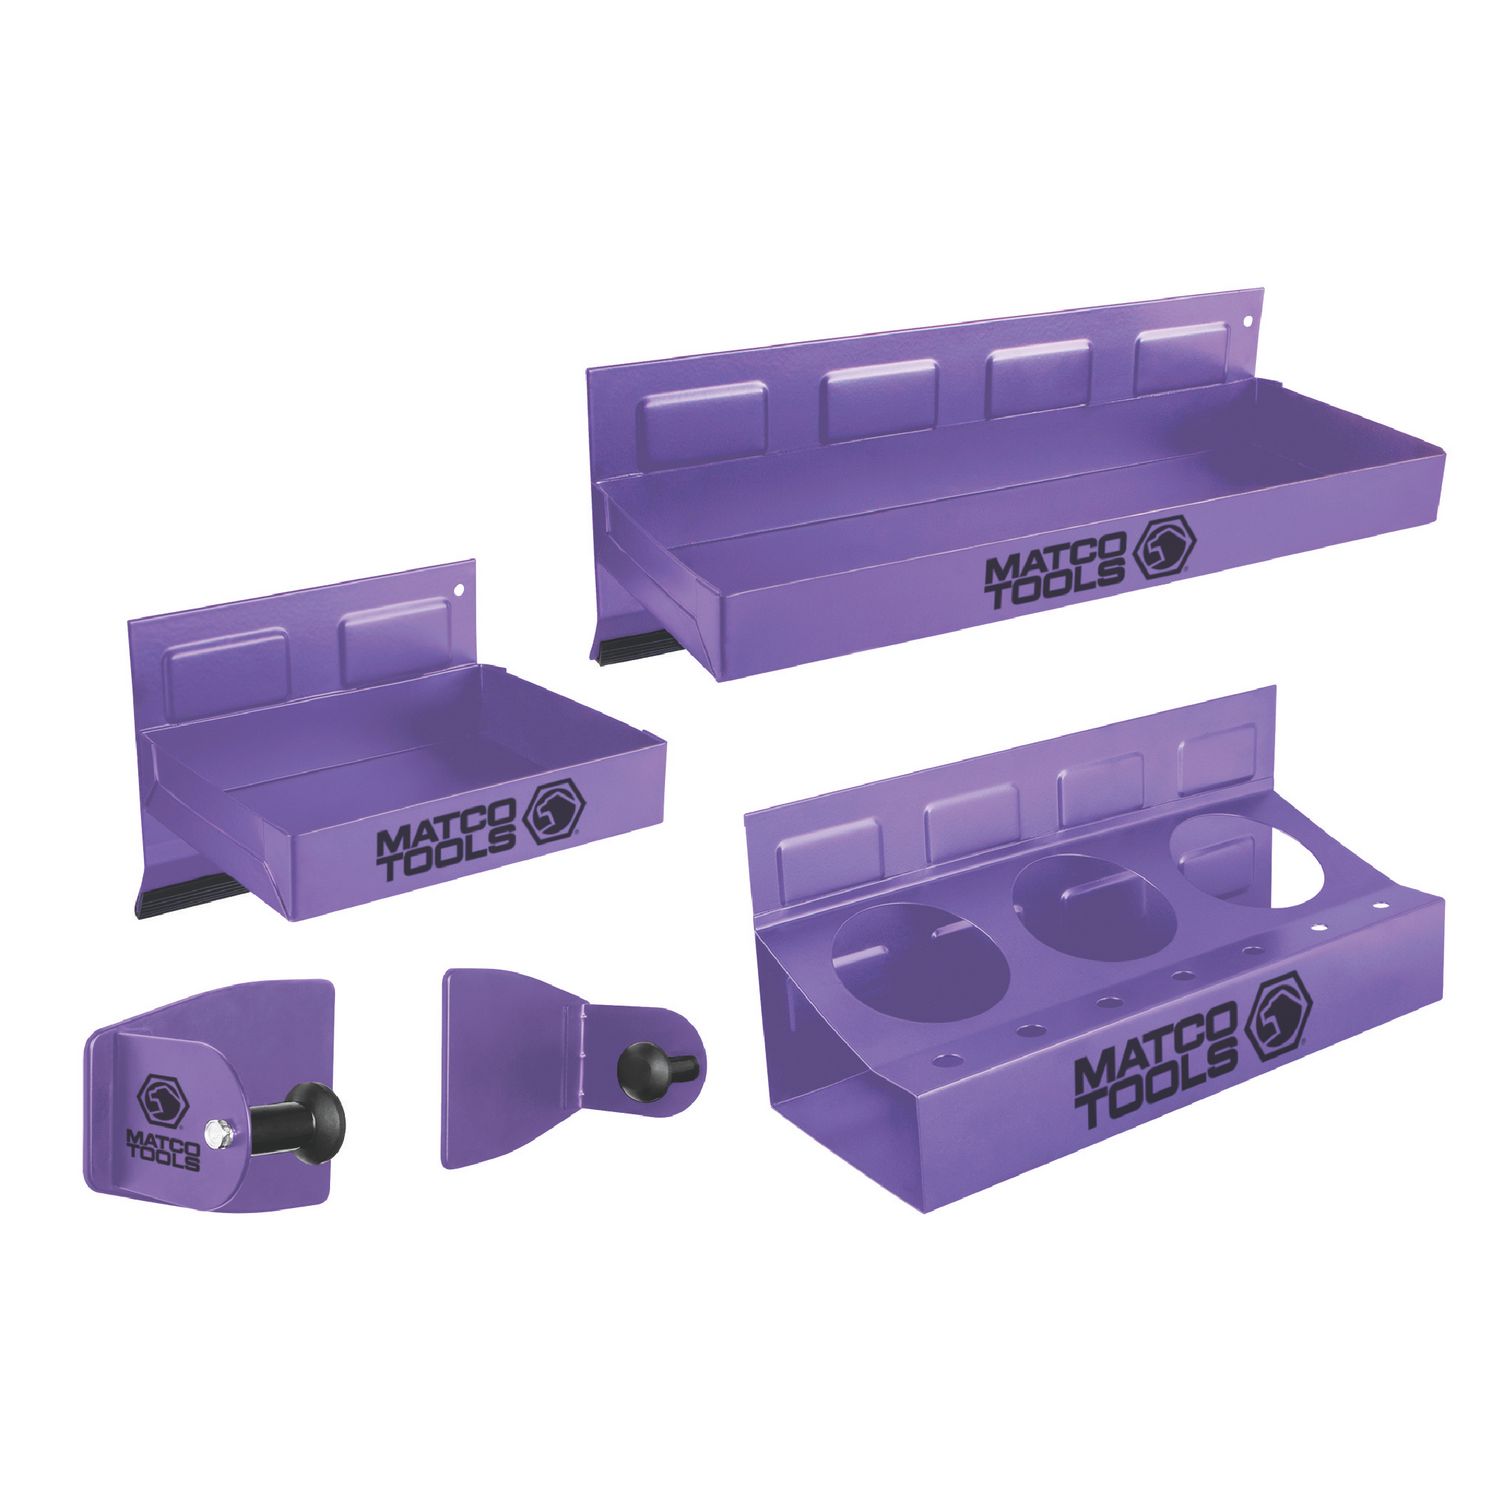 PREMIUM Silicone Tool Tray | Flexible | Multi Purpose Mat | Portable Tool Box Organizer | No Magnets | Easy Clean Up - (Duo-Pack-Purple Beast)